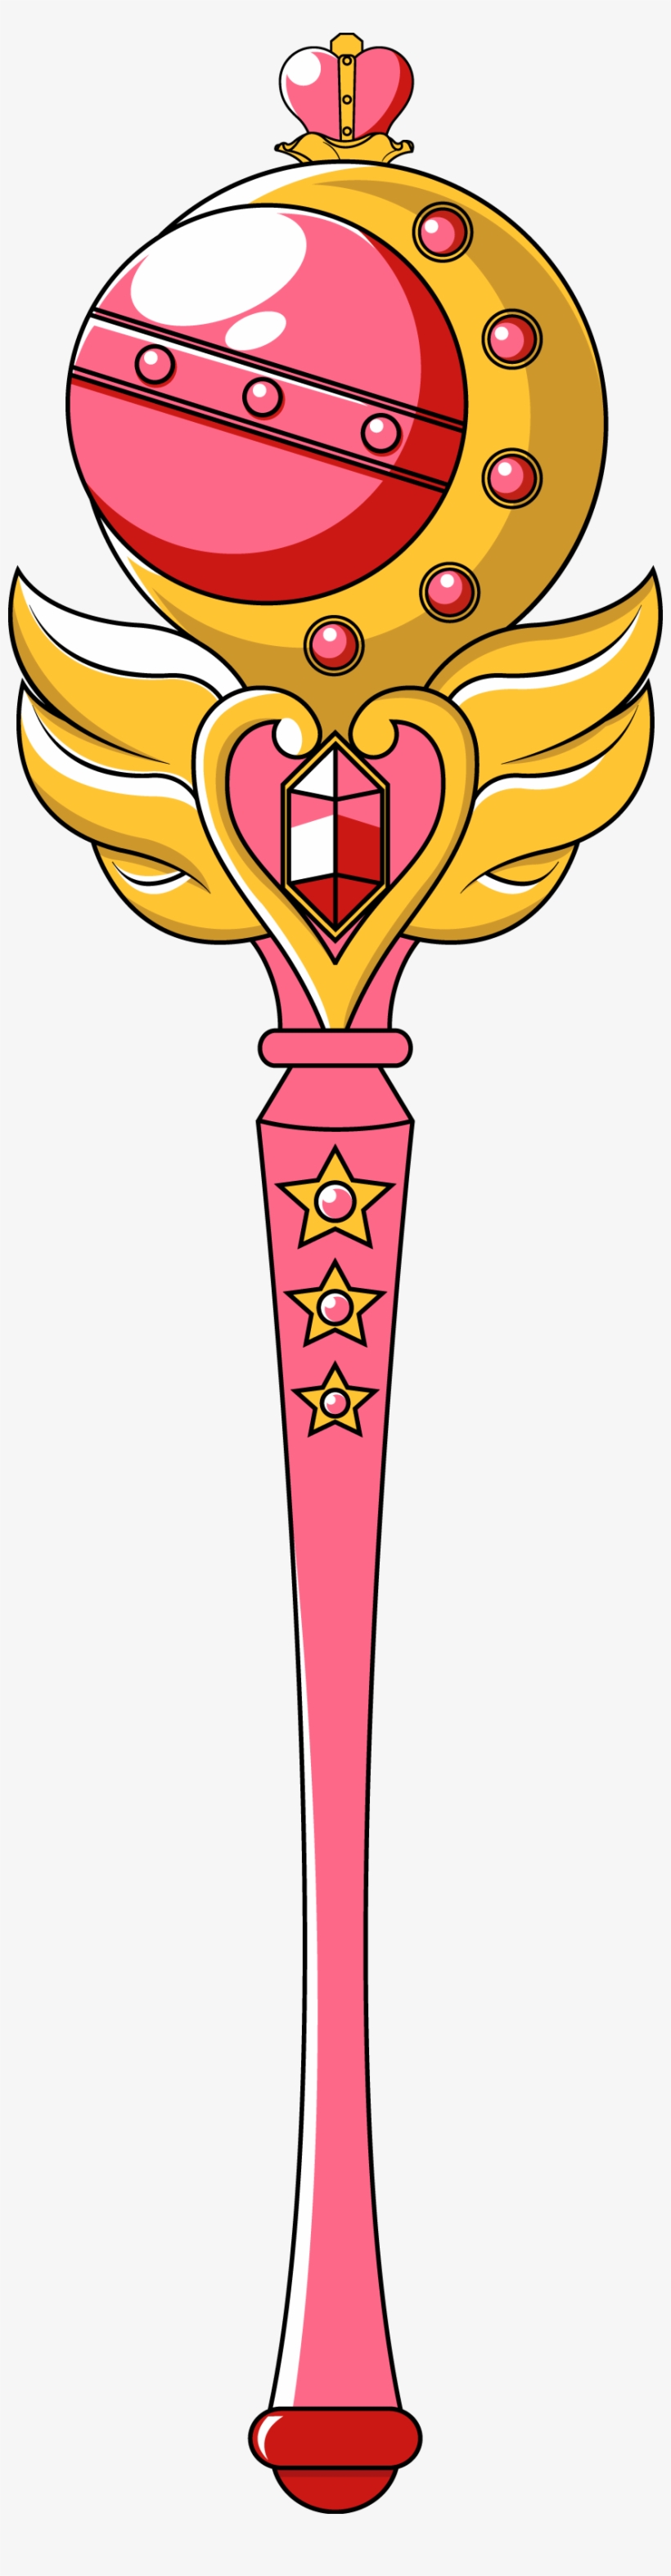 Images For Anime Fantasy Art - Sailor Moon Wand Png, transparent png #150768